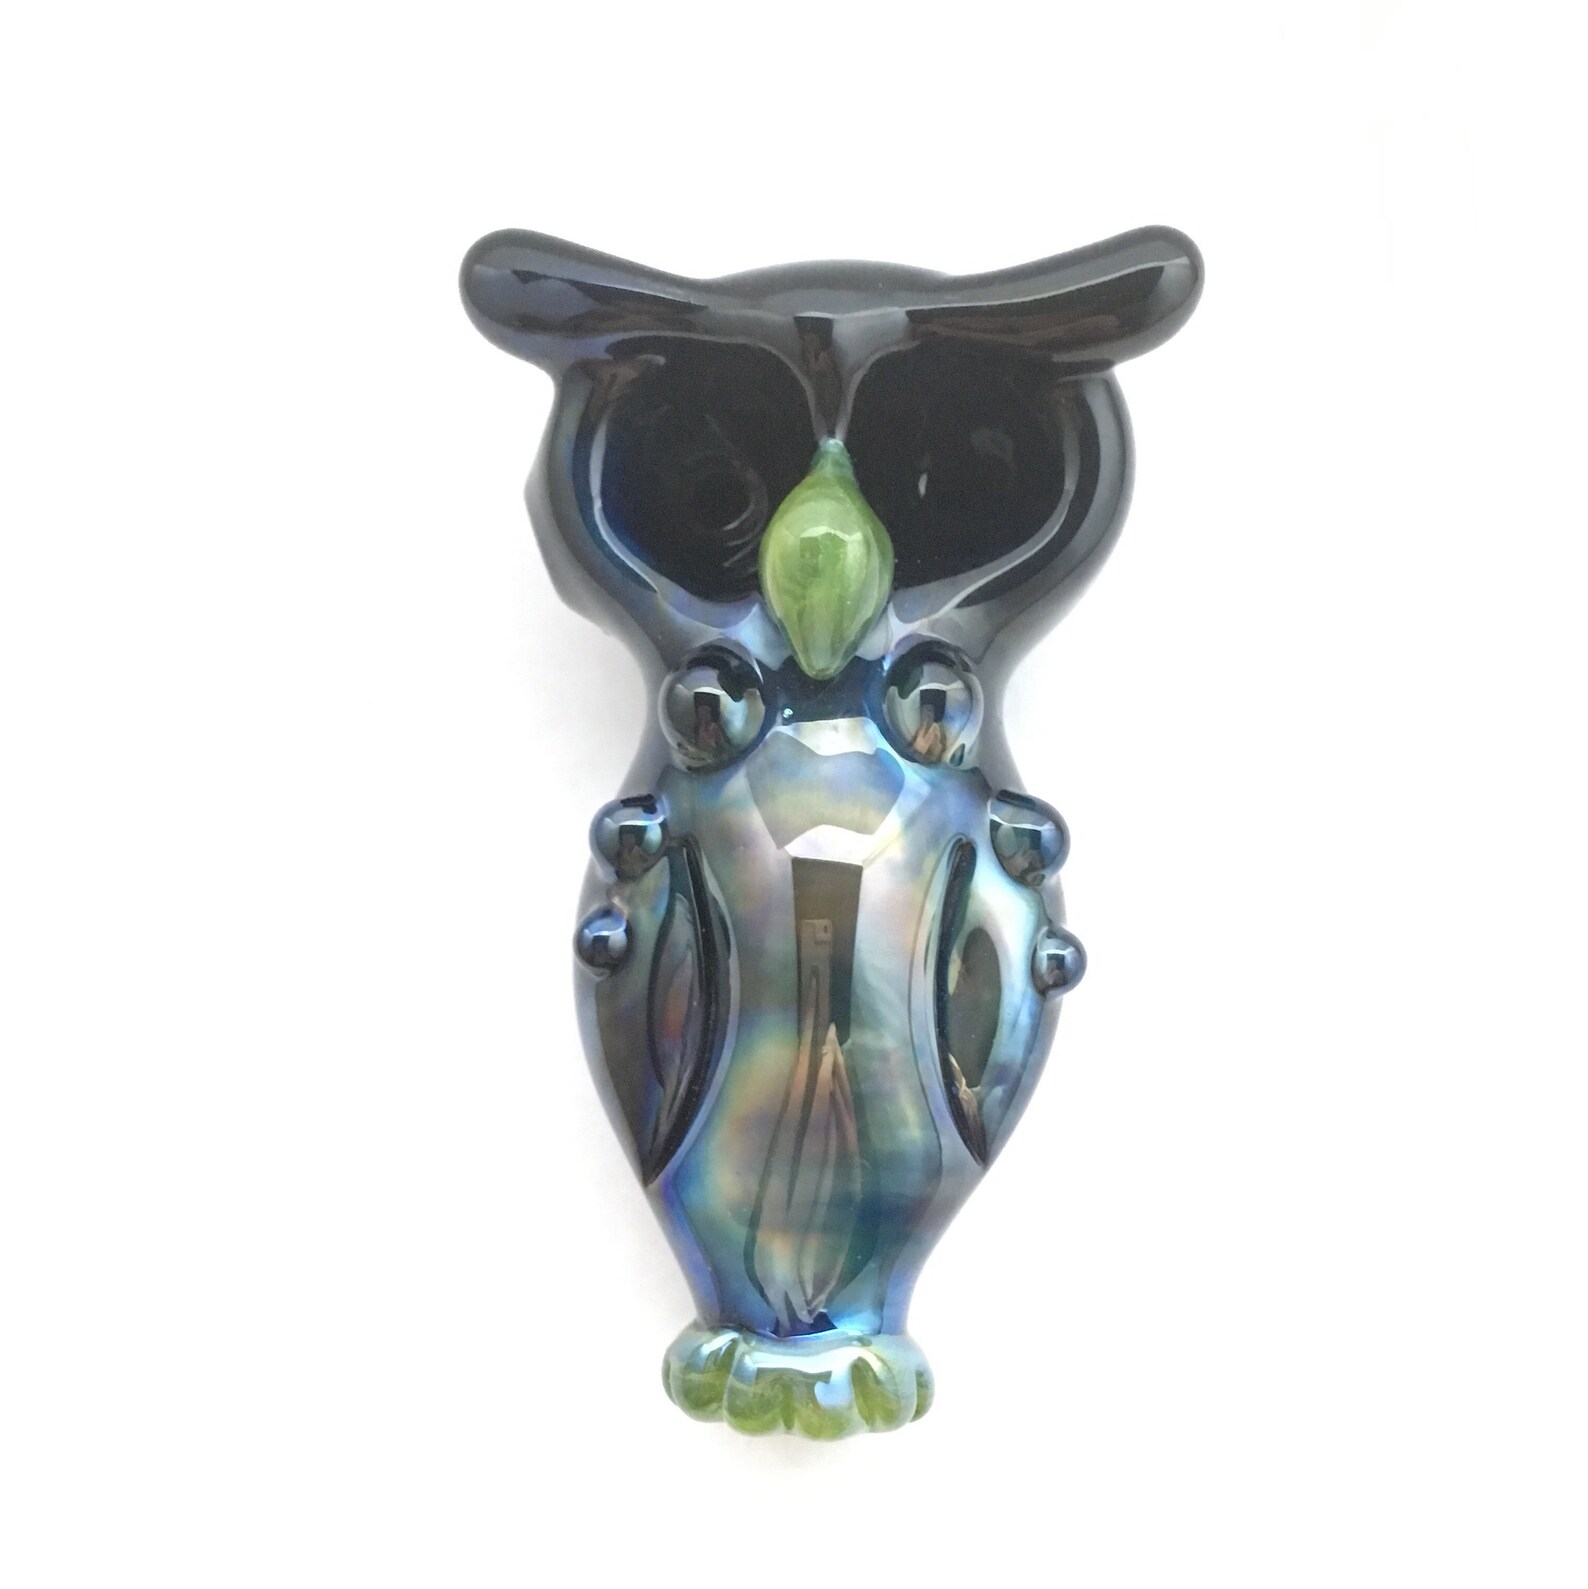 Mix, Match, and Enjoy: The Versatility of the Hoot Owl Double Bowl Spoon Pipe